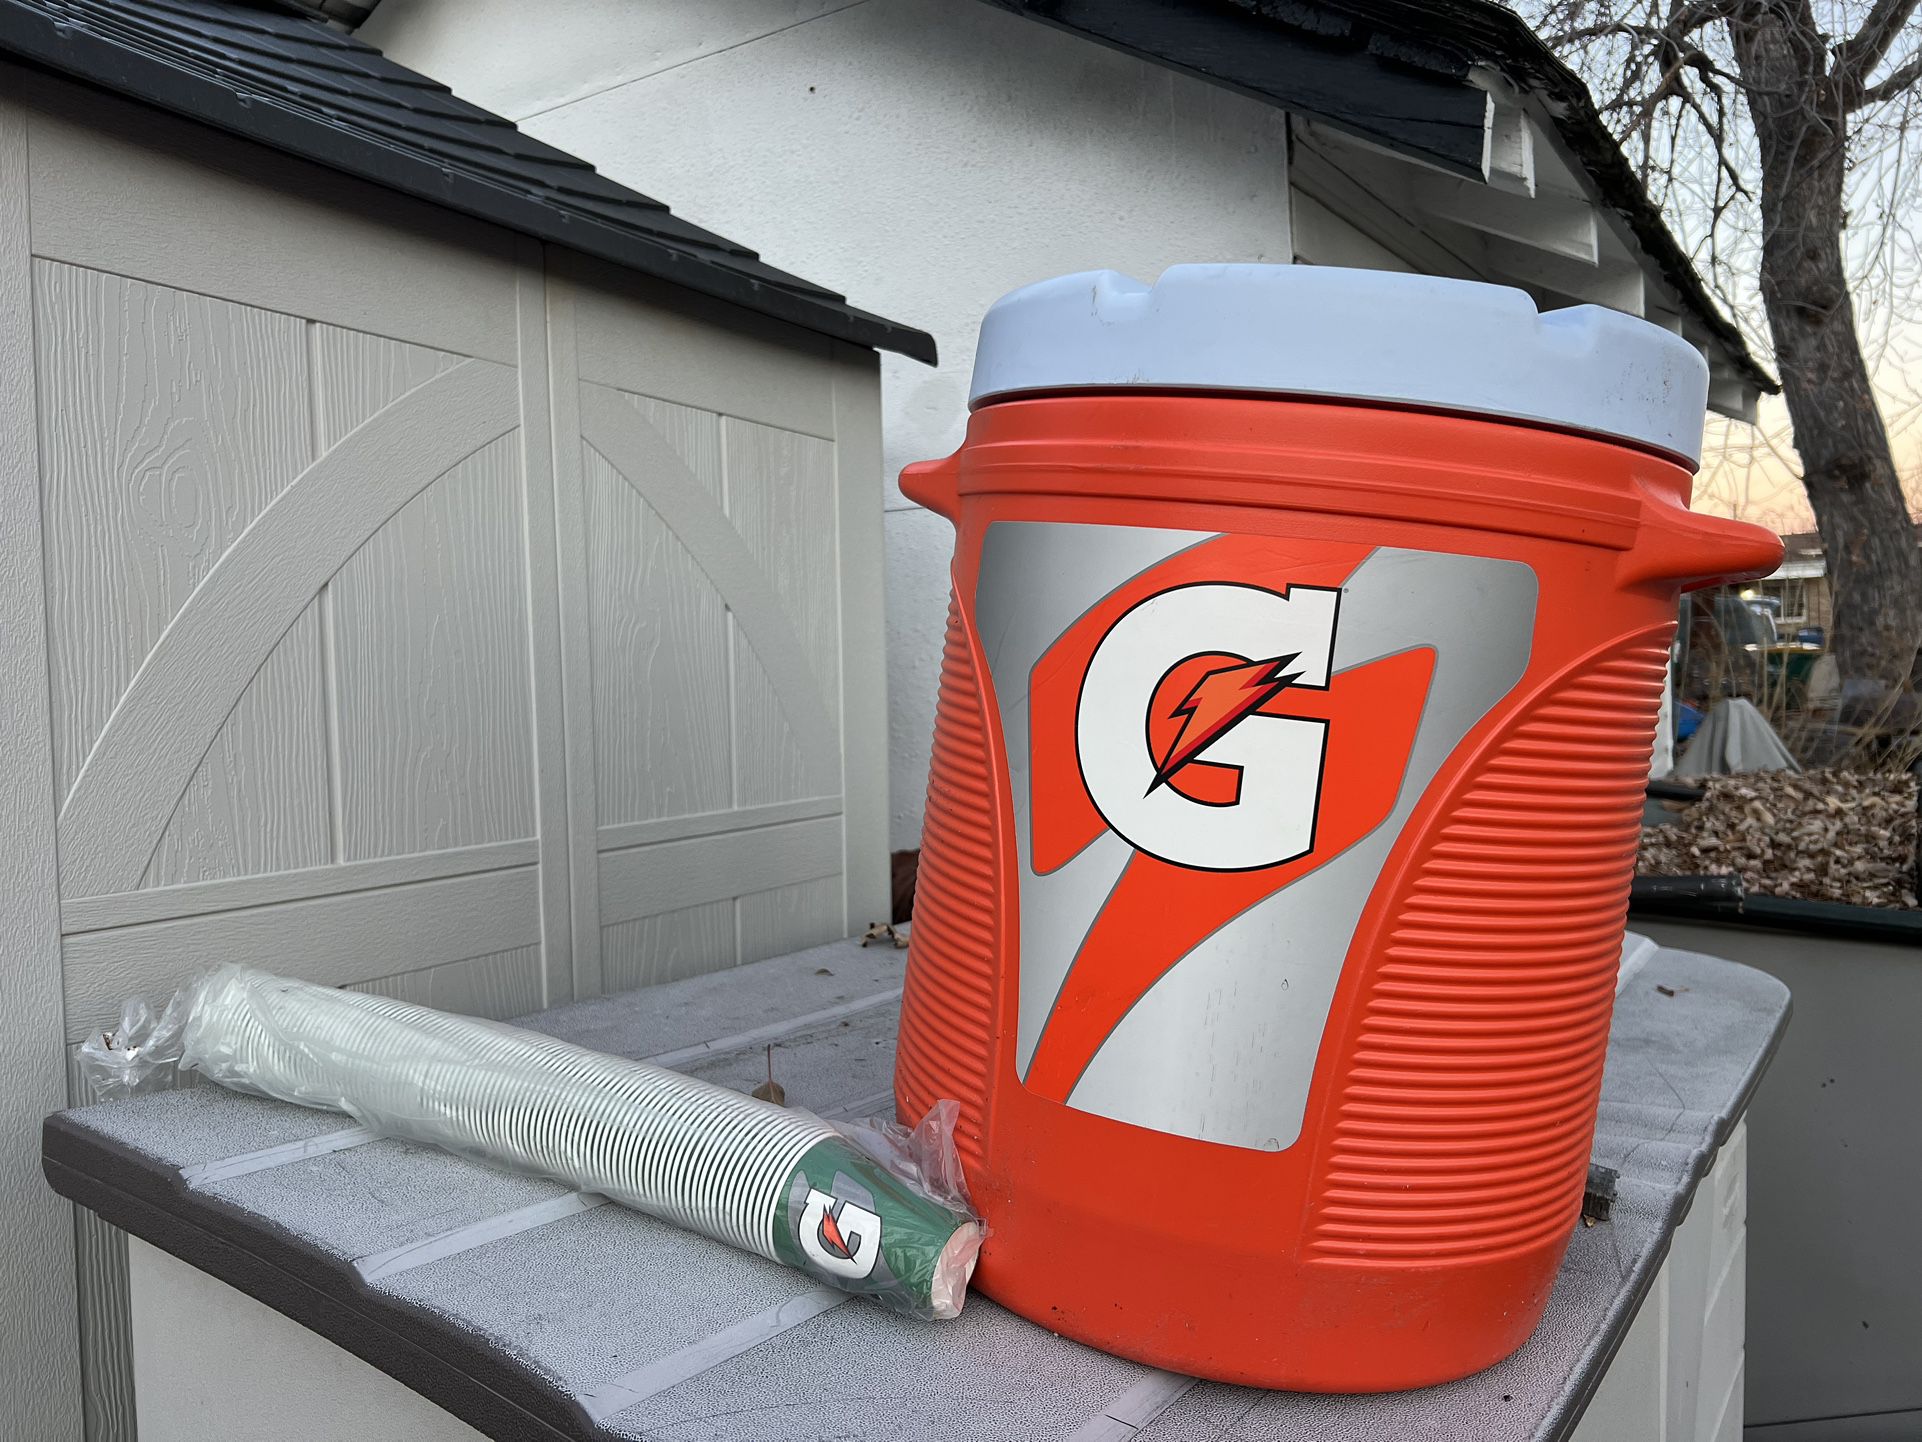 Rubbermaid Gatorade 10 Gallon Cooler Model 1610 With Some Cups 